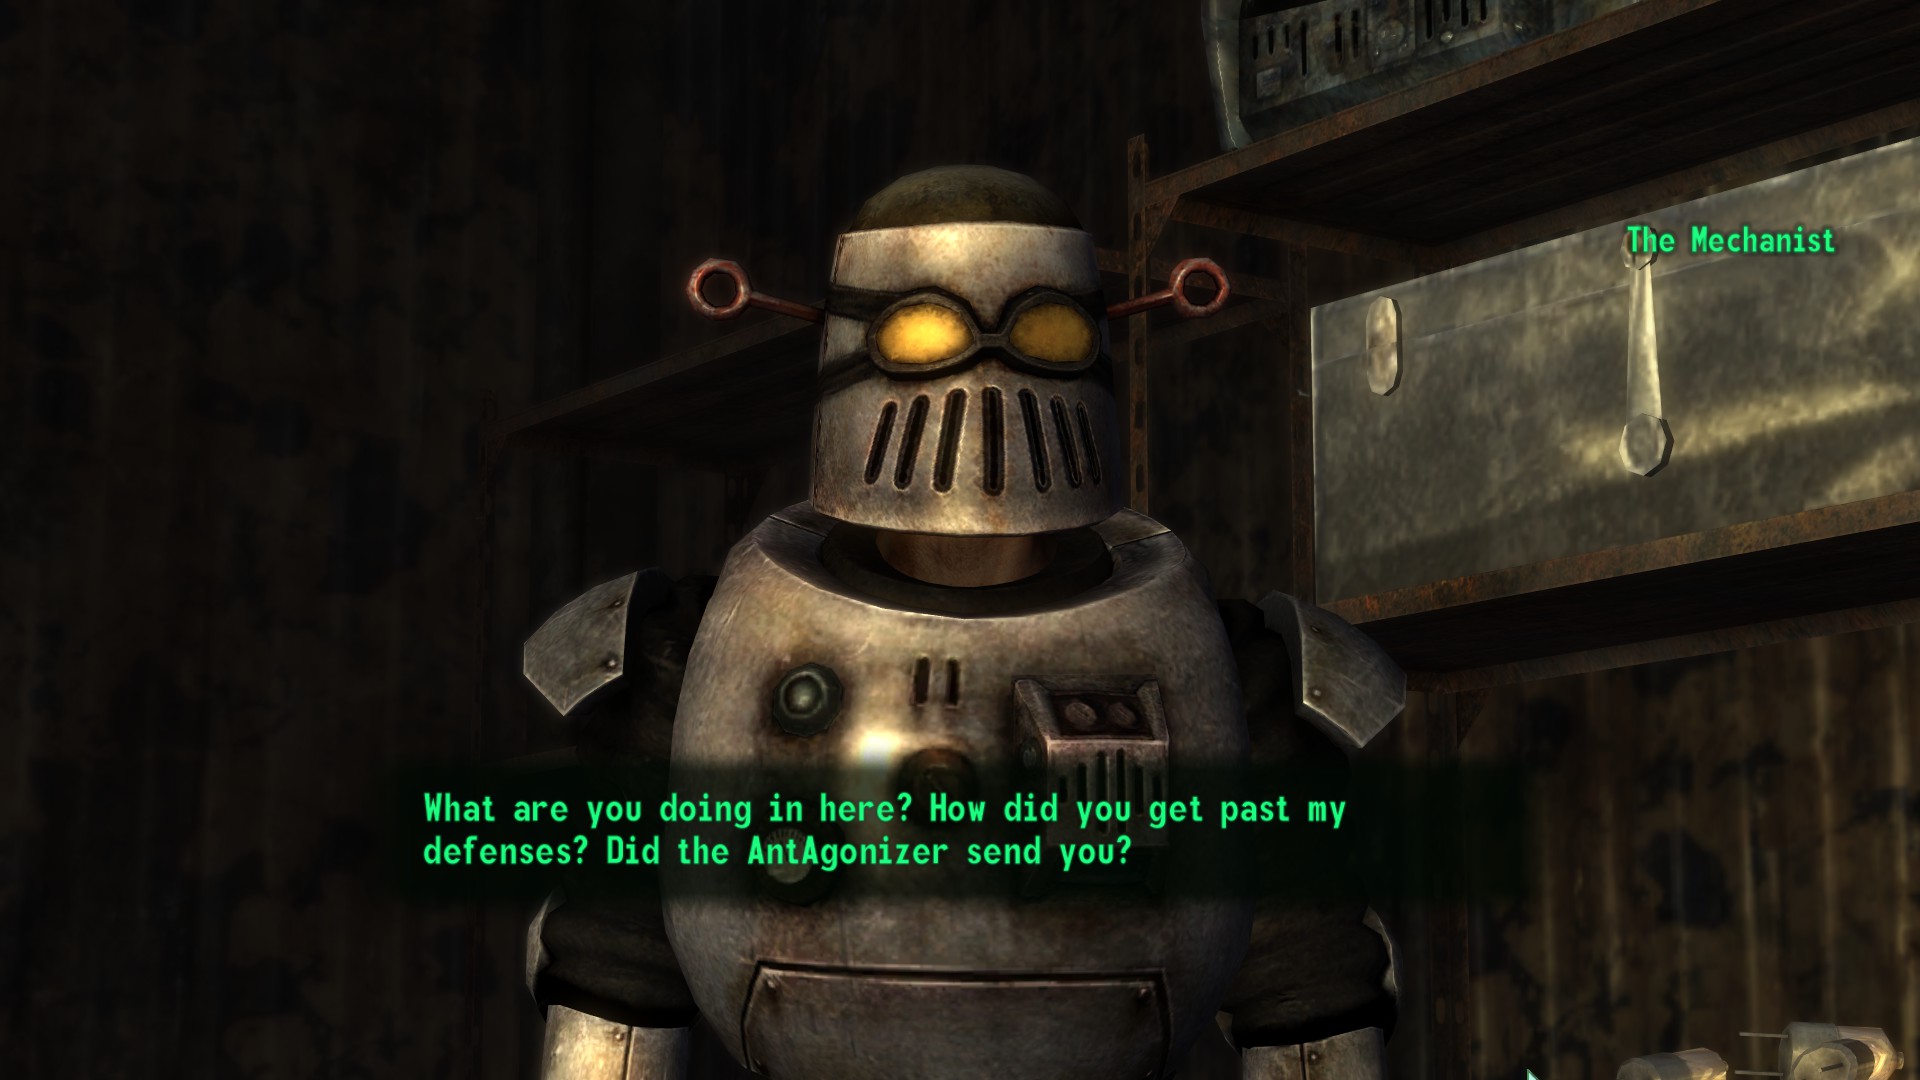 30 More Hours With Fallout 3, Which Is Still Damn Good